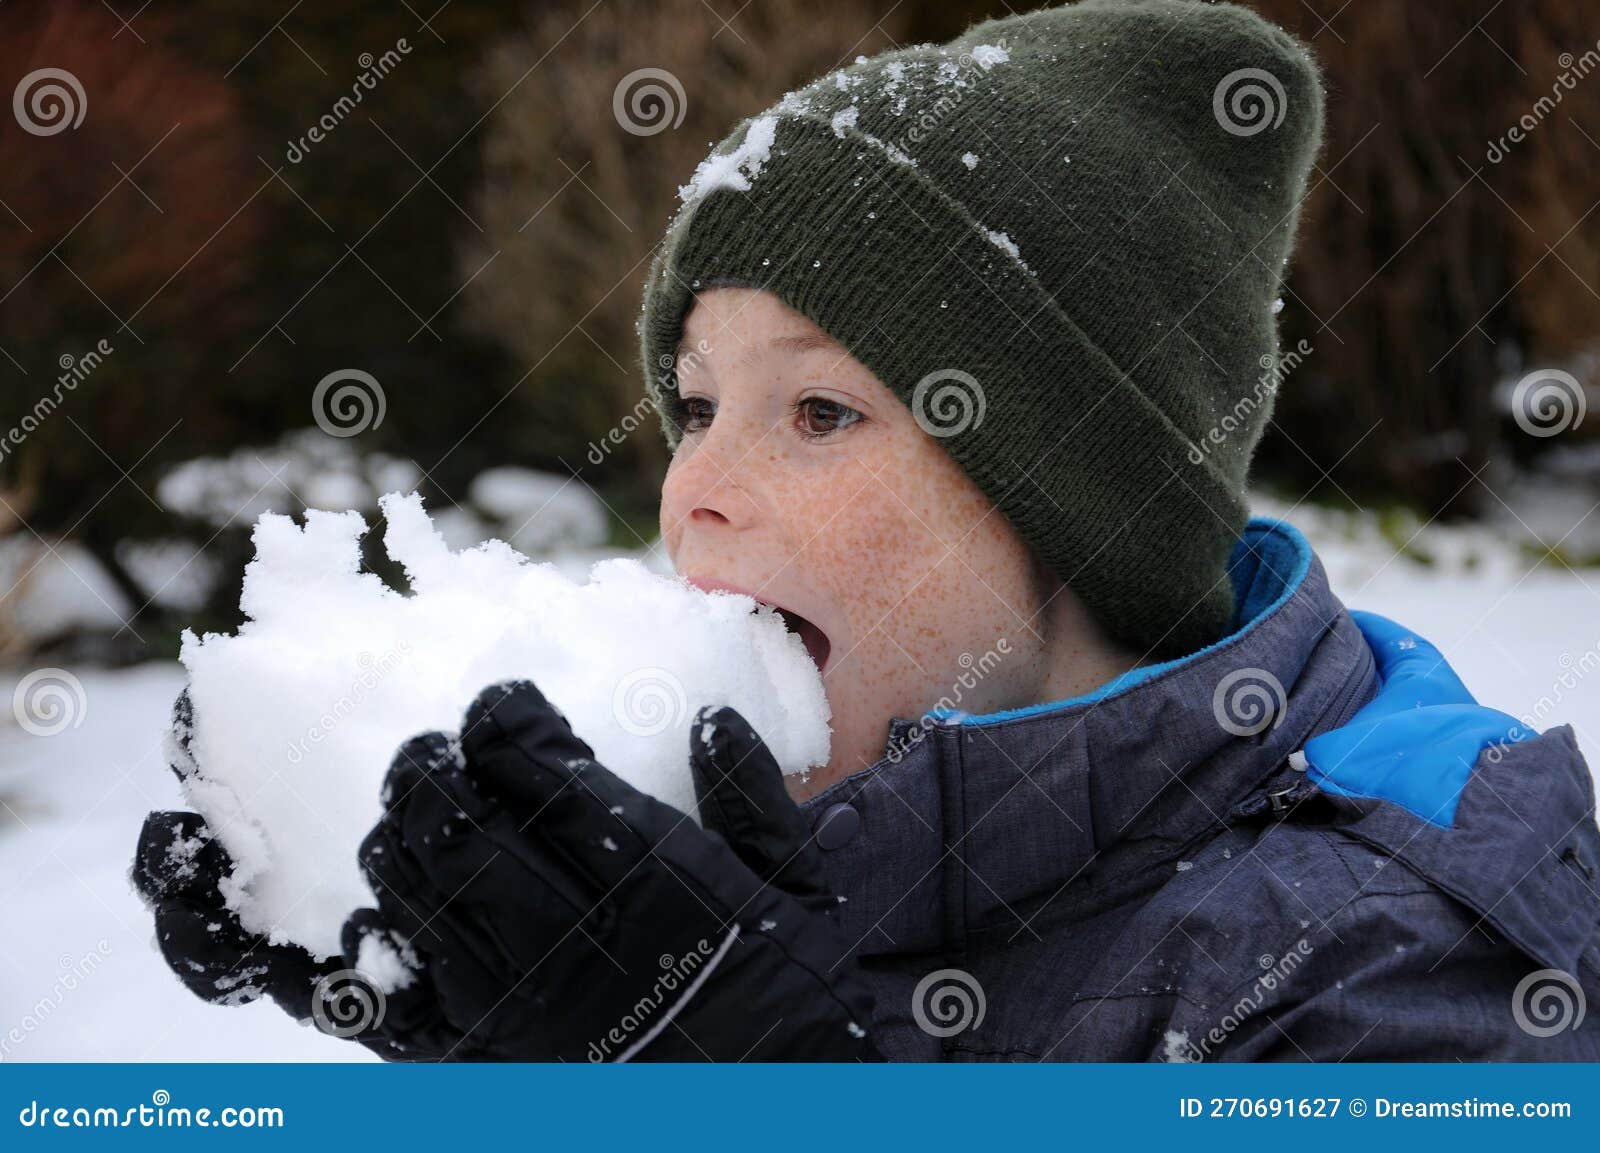 happy wintertime, boy tastes with his tongue the snow